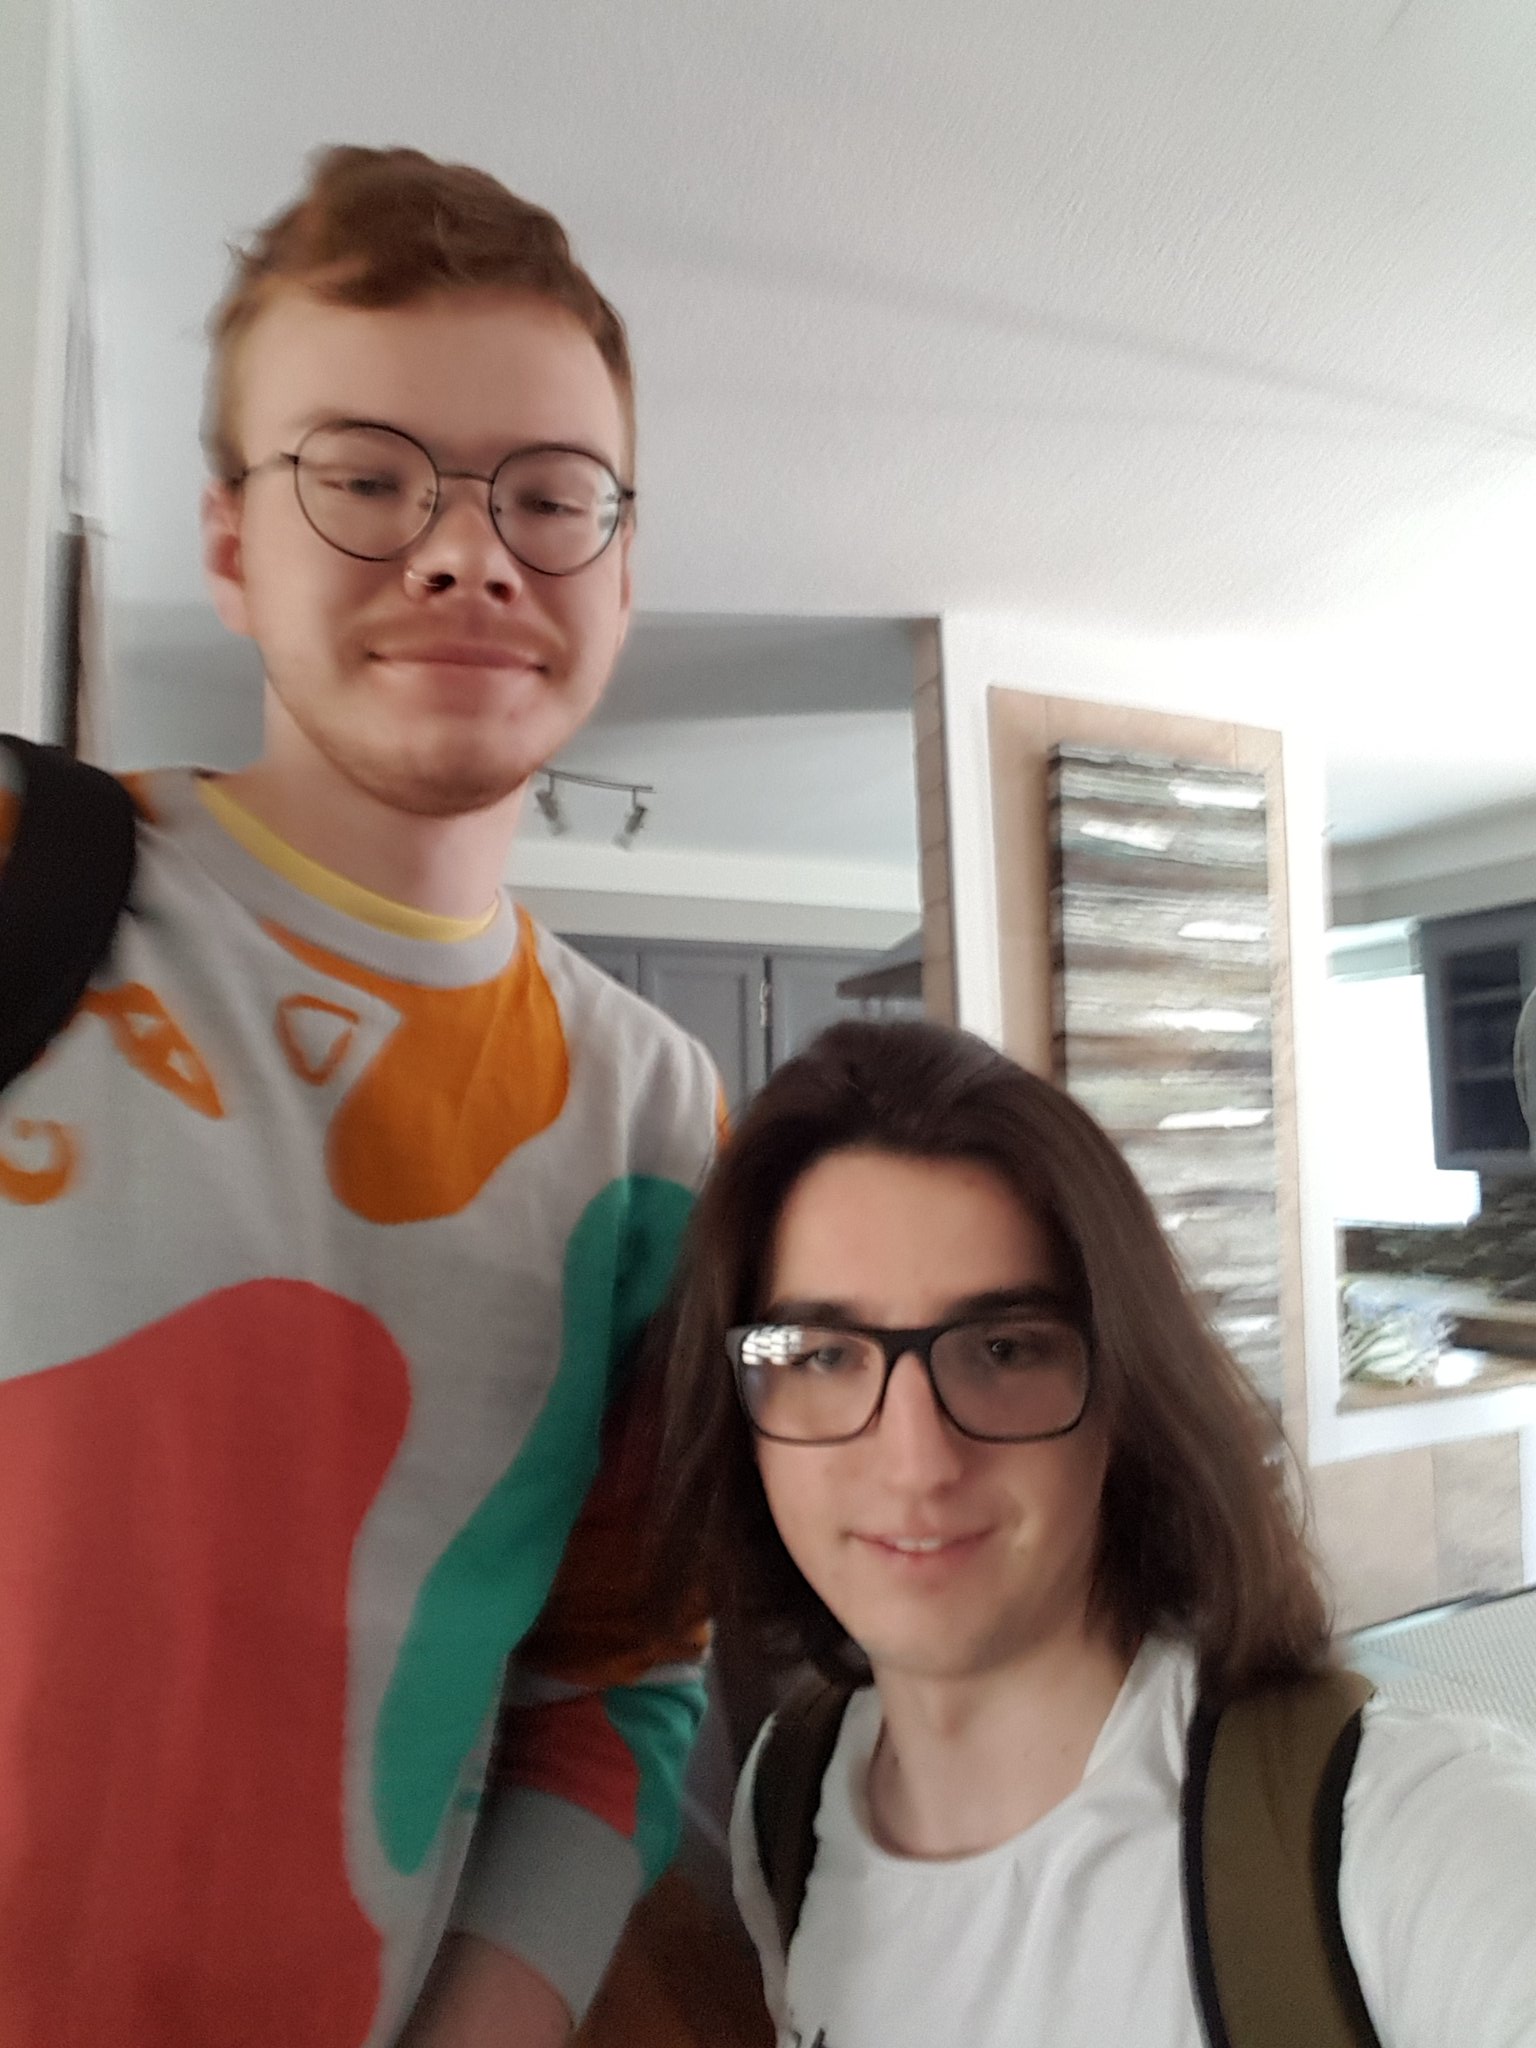 søskende Tanzania Ødelægge Kappa Kaiju on Twitter: "Shout out to Aksel for letting me stand on a chair  to take this picture https://t.co/DyP2rpJxYL" / X